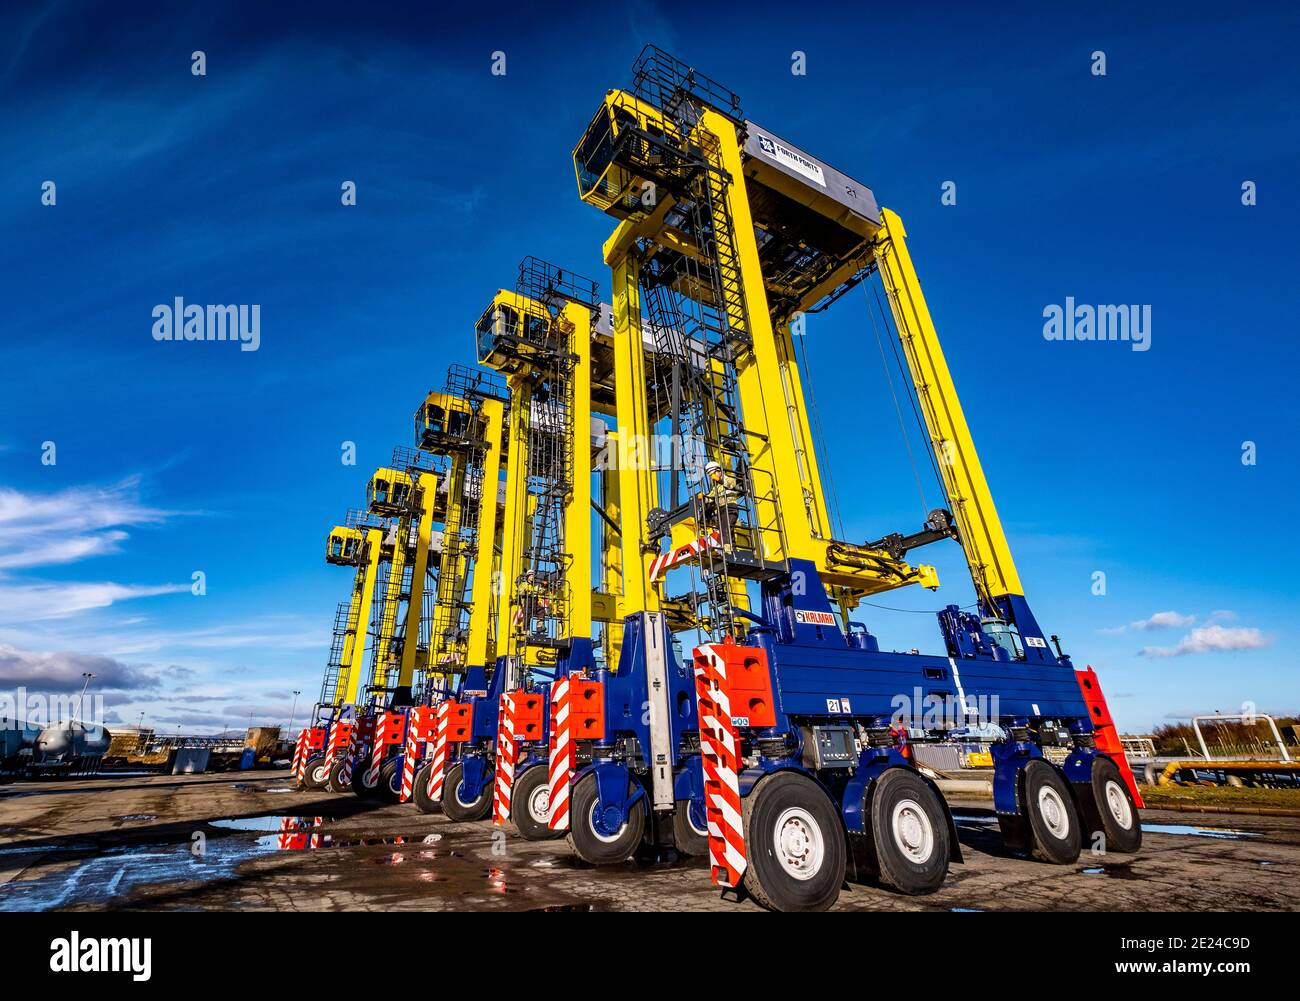 Straddle Carriers at dockside Stock Photo